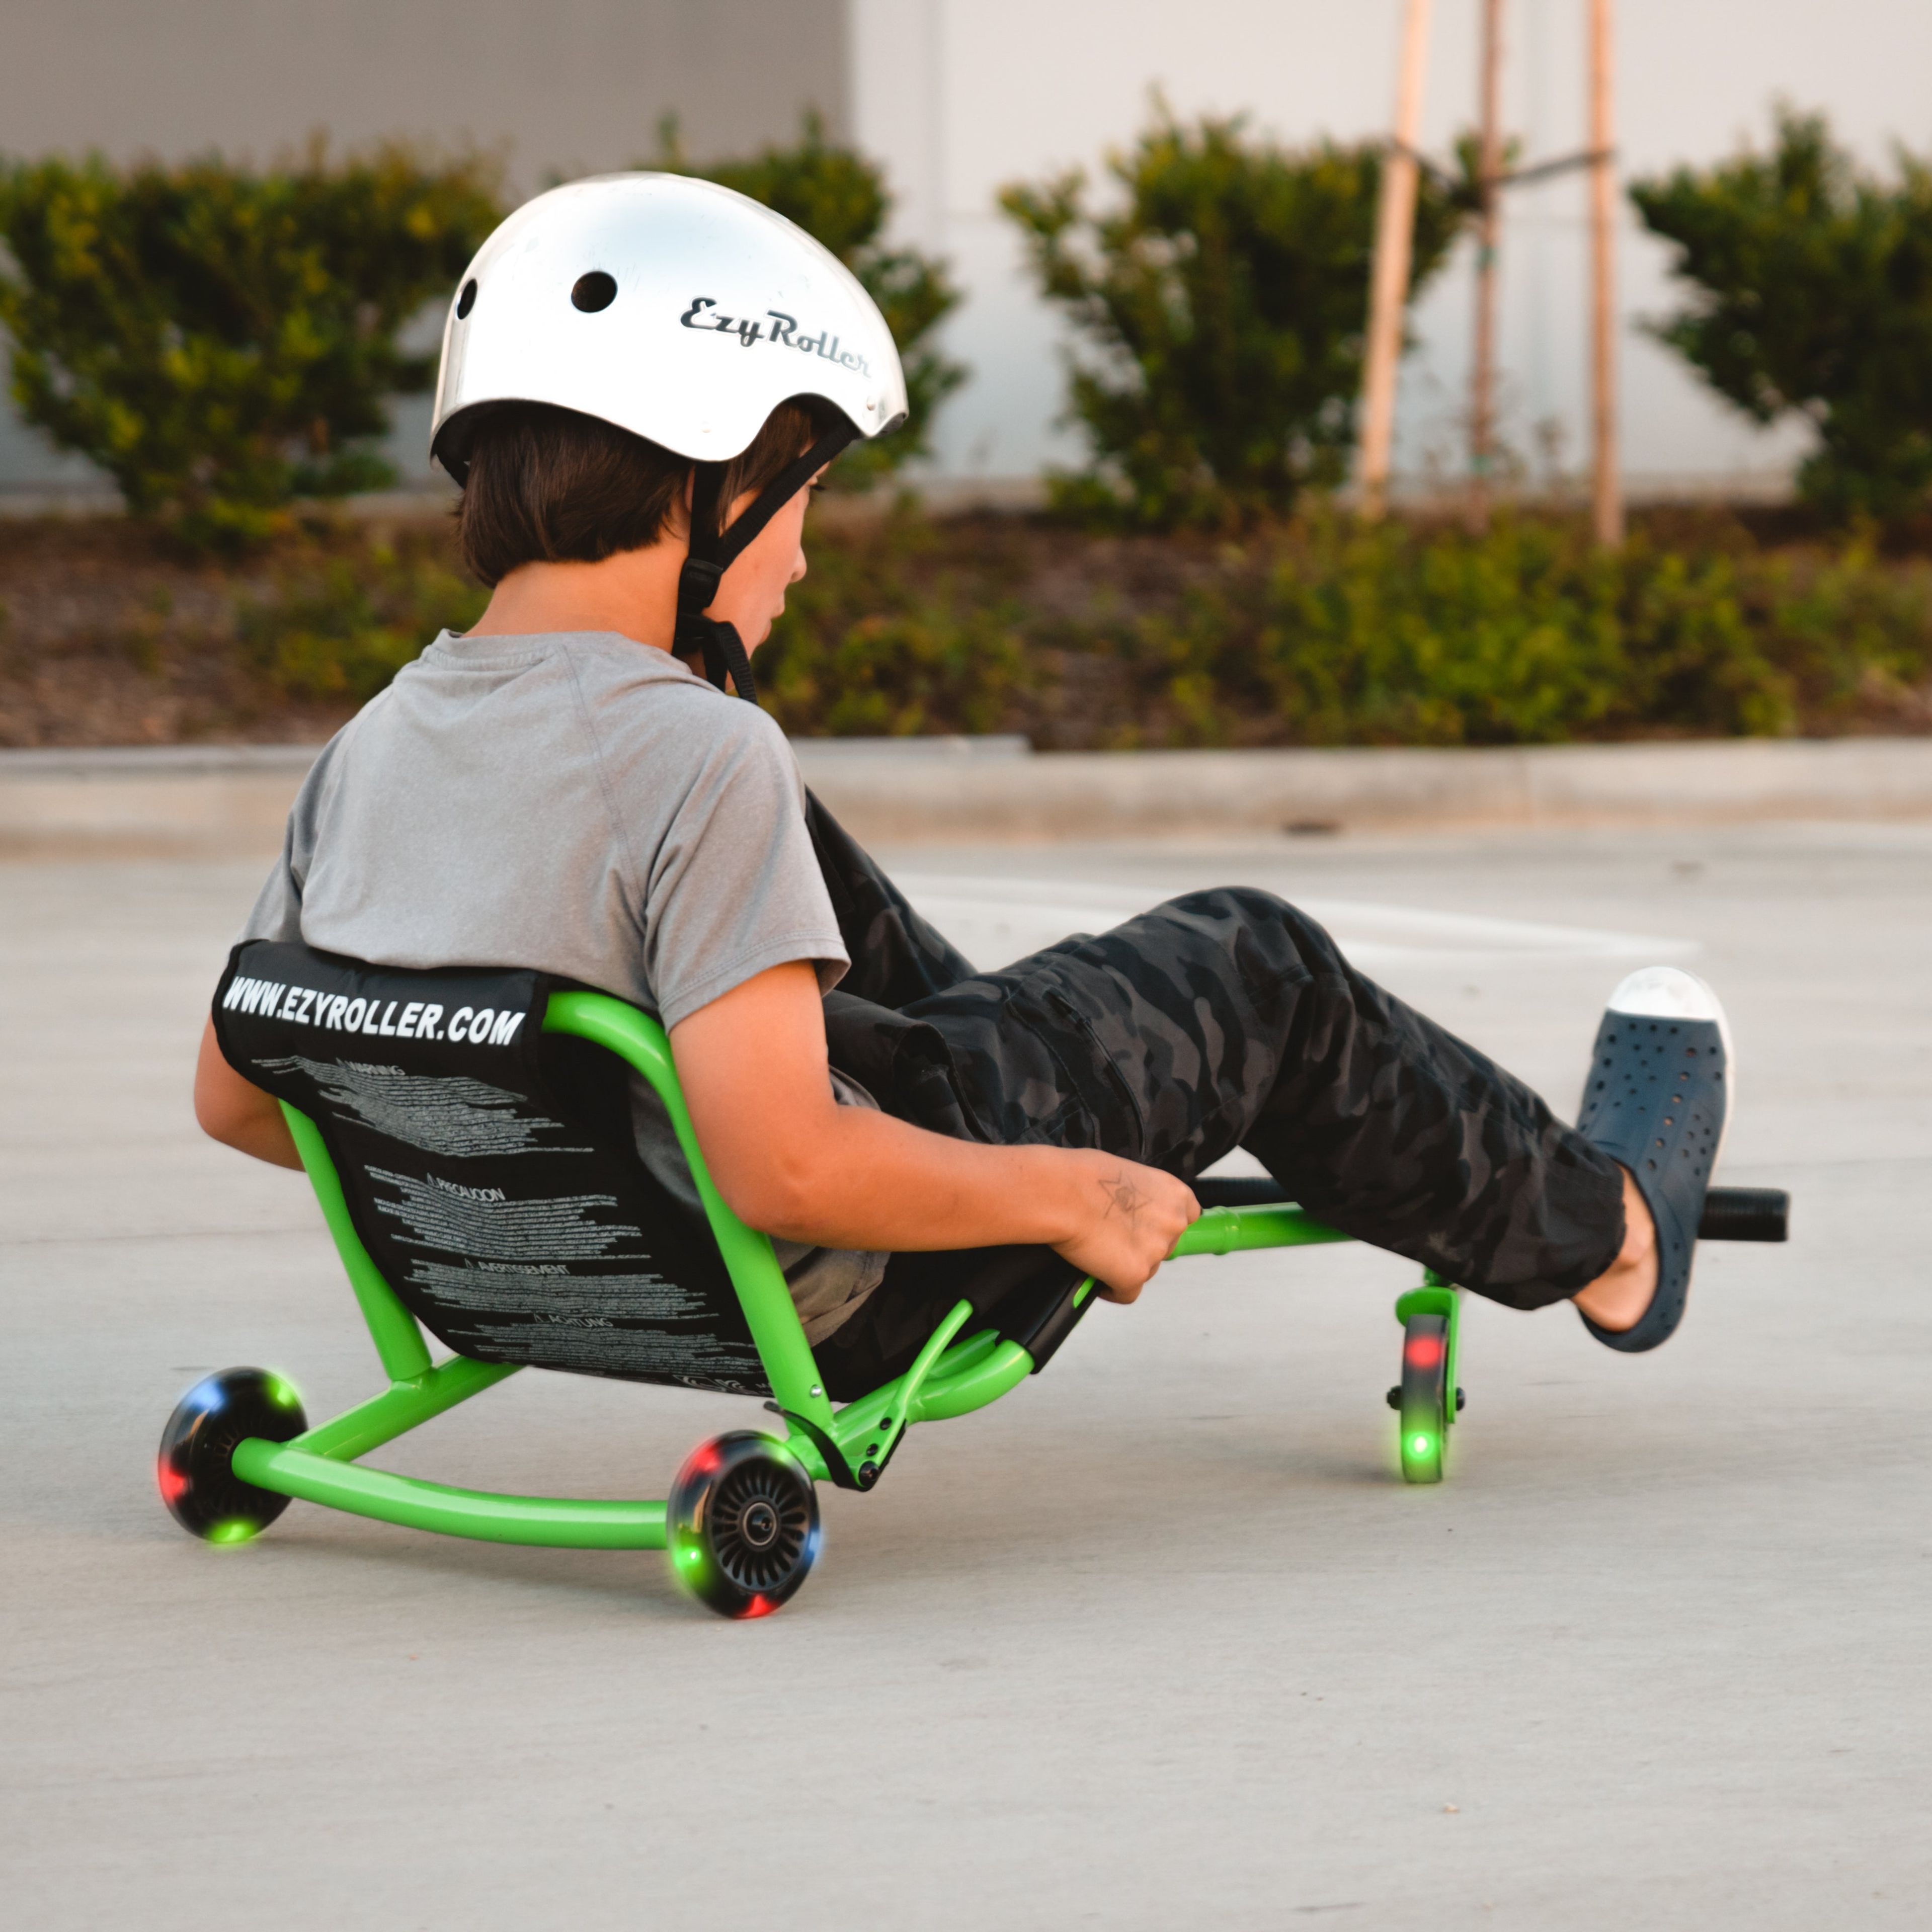 EzyRoller Classic Lime Green with LED wheels - Limited Edition